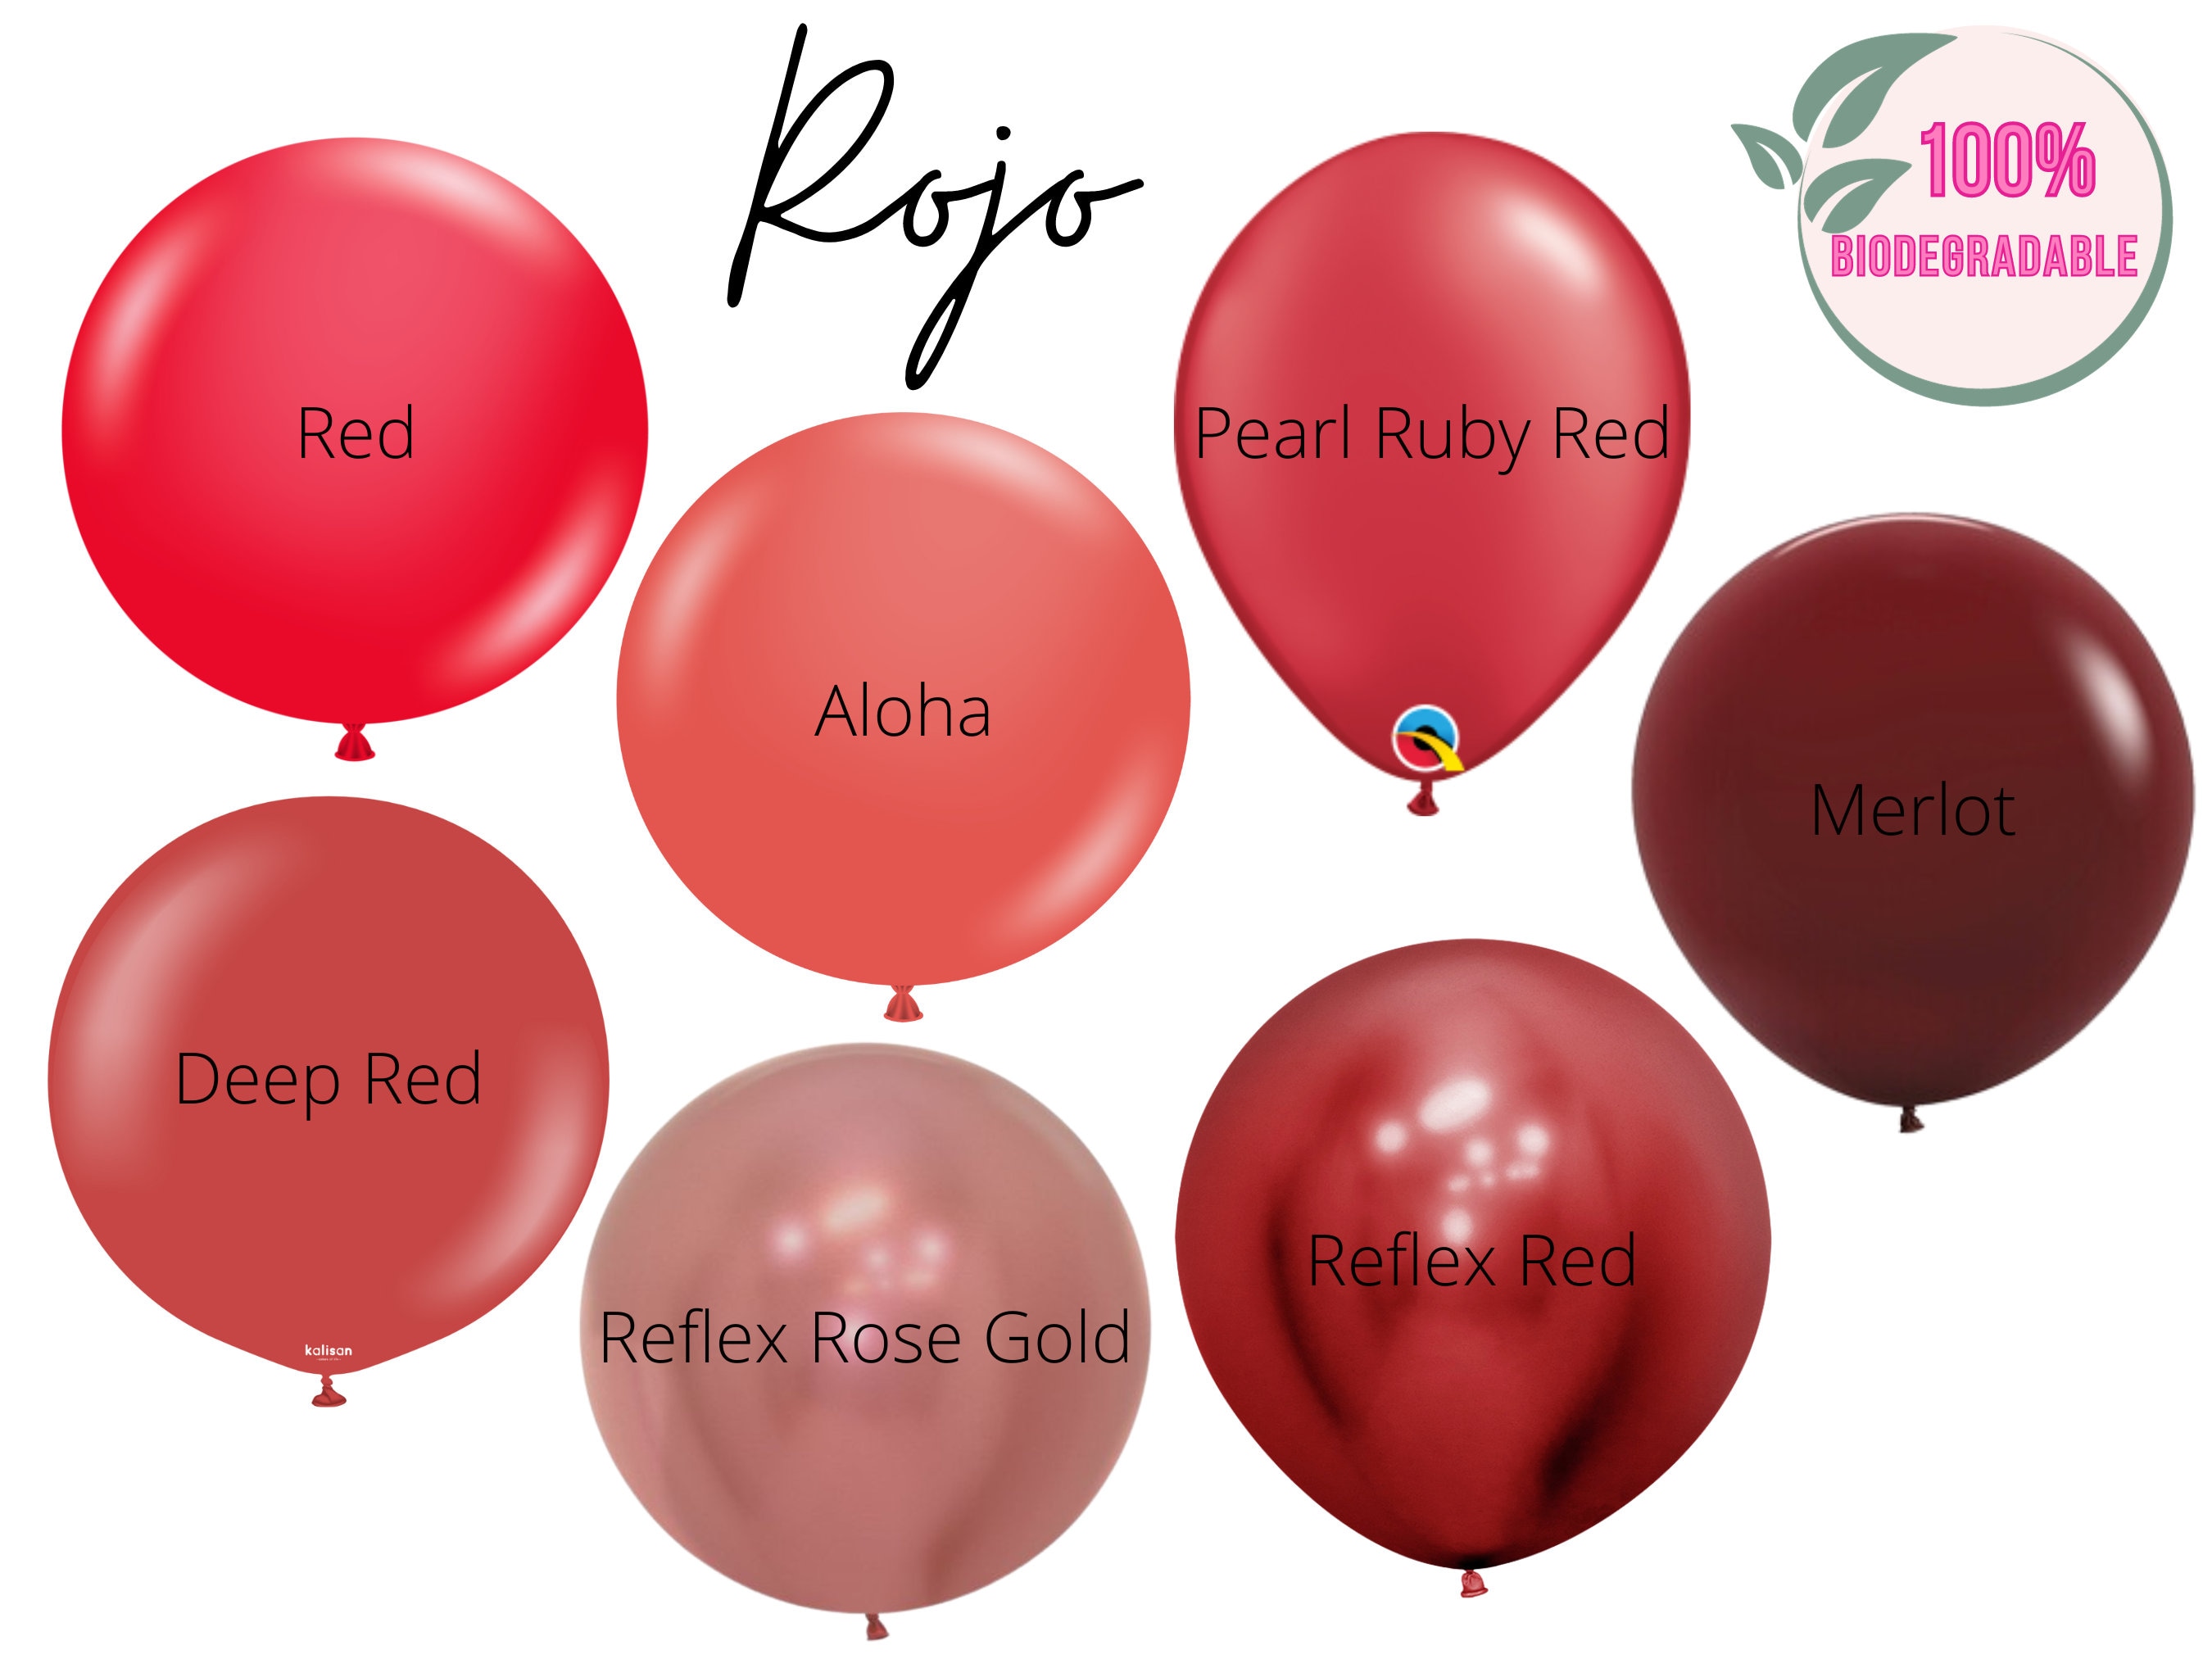 Red Biodegradable Balloons / Pink and Red Bridal Shower, Burgundy